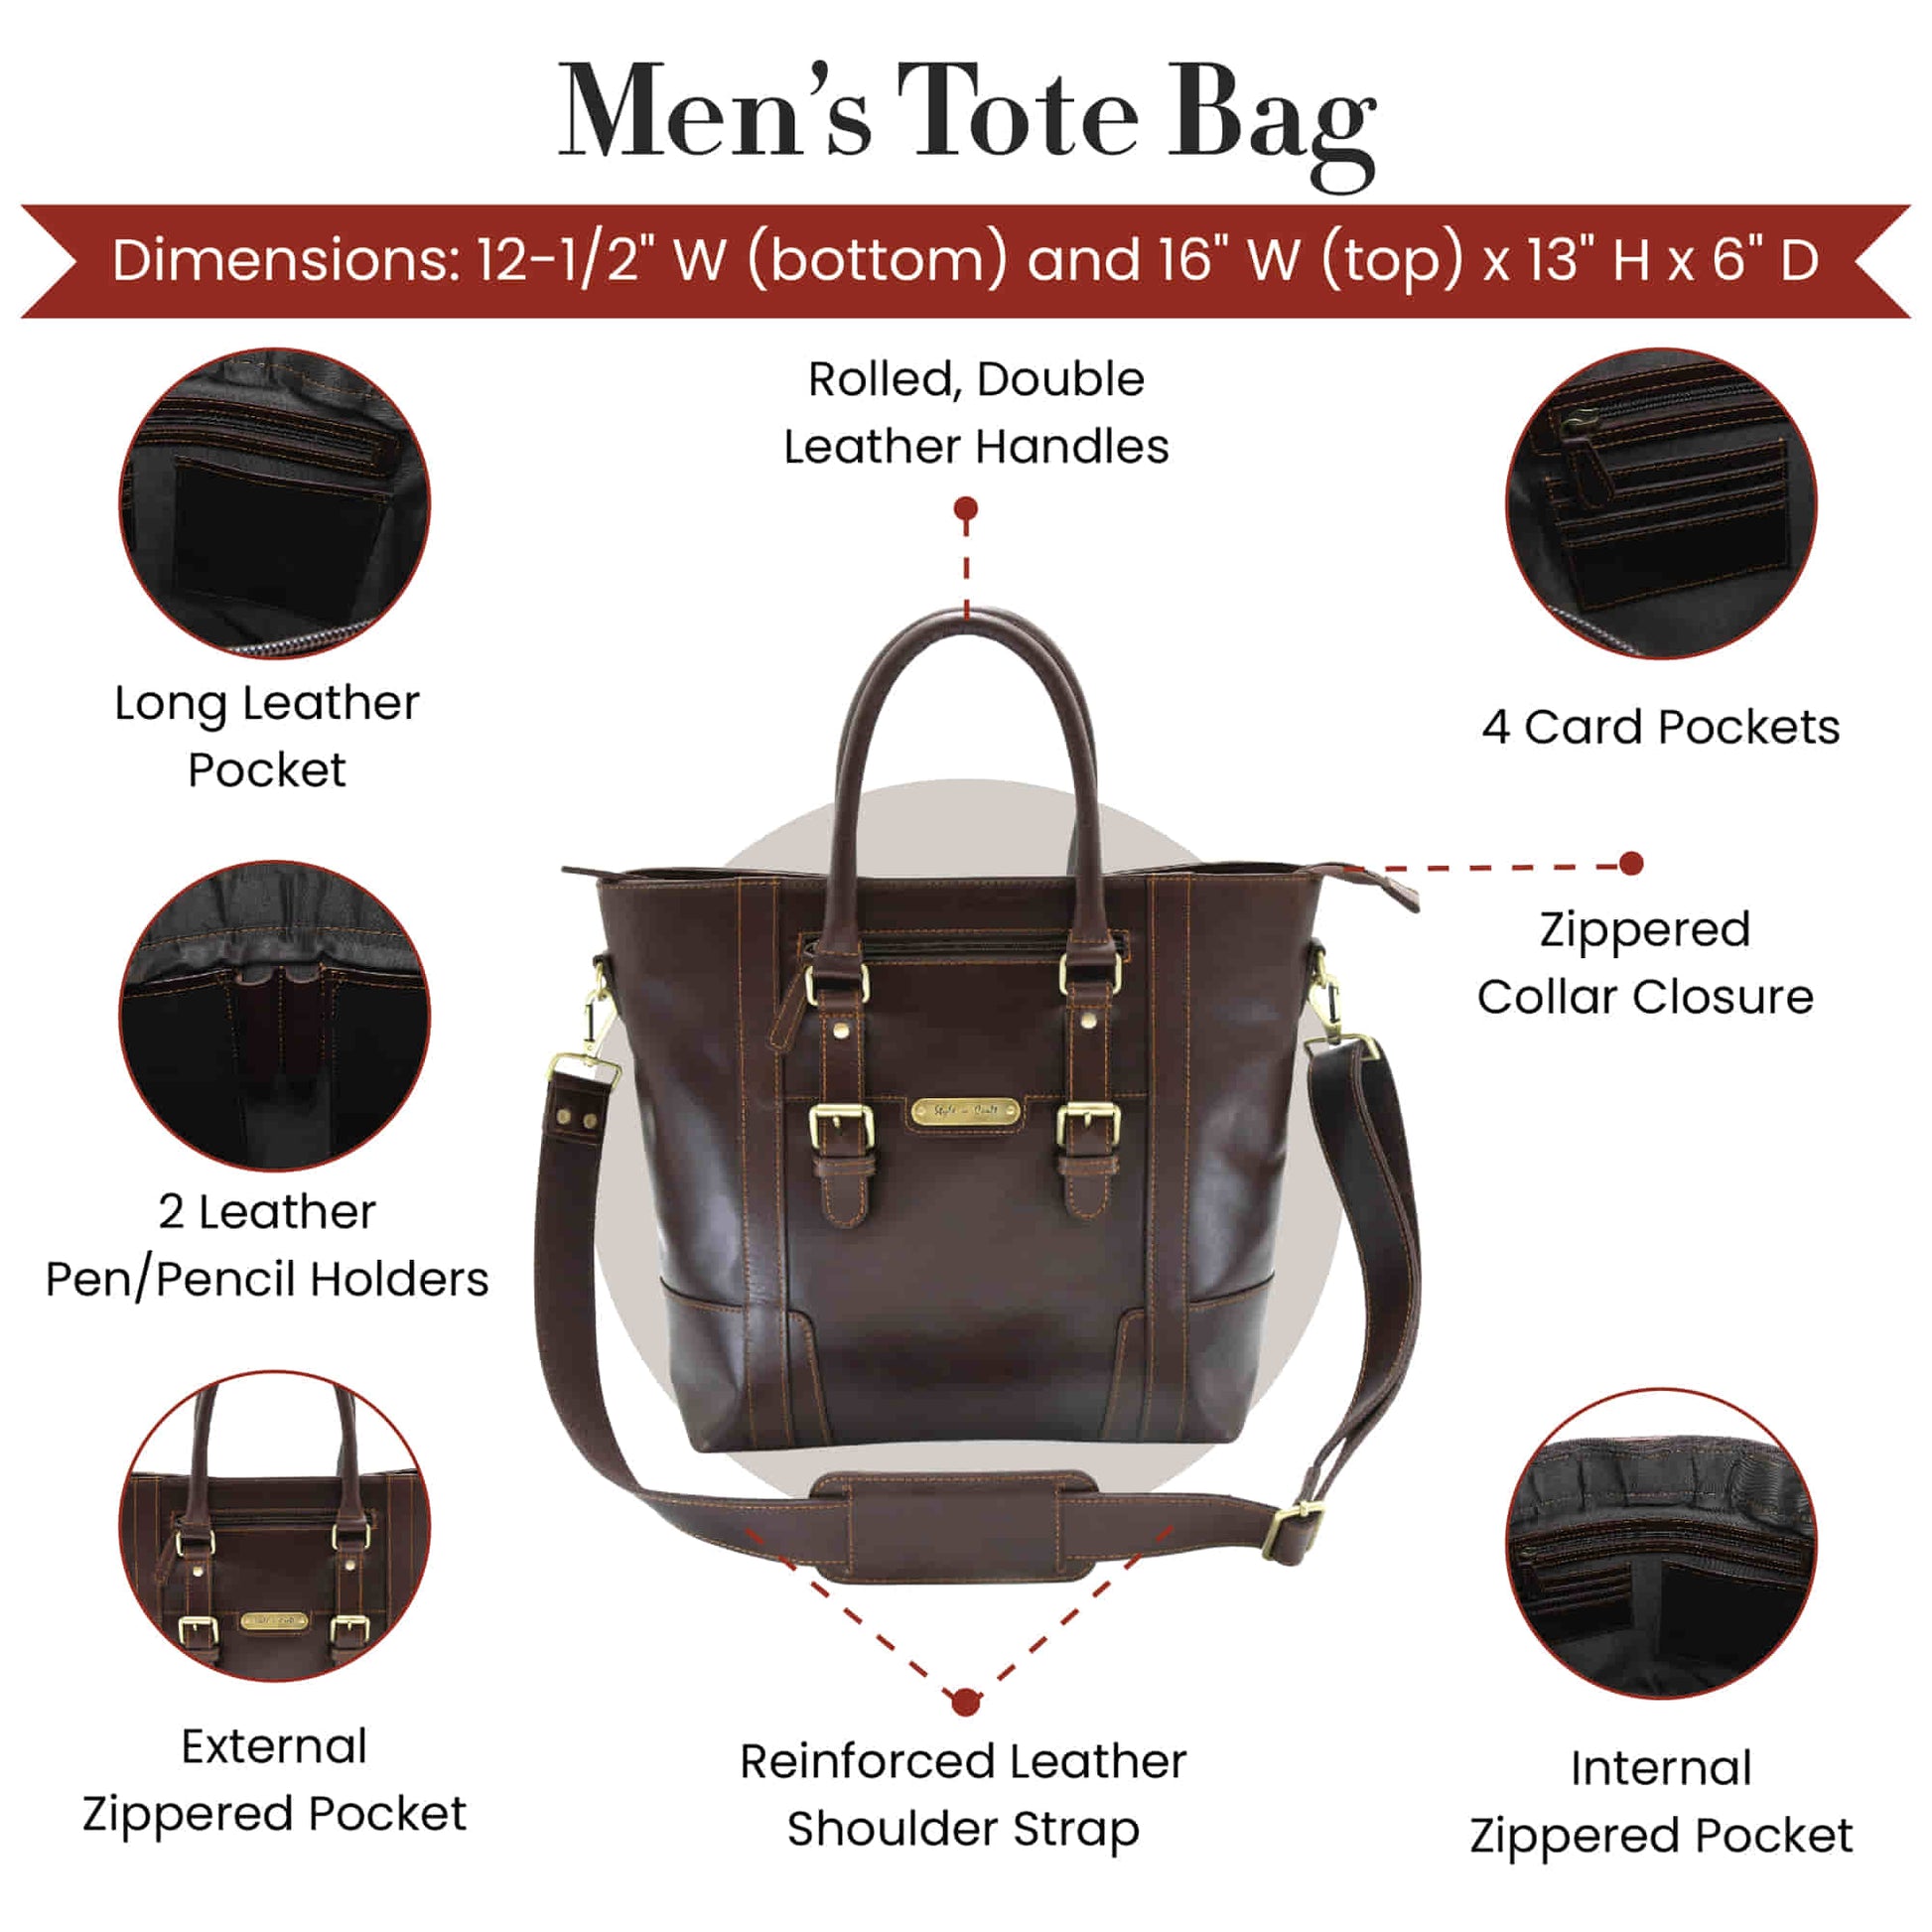 Style n Craft 392006 Men's Tote Bag in Full Grain Dark Brown Leather - Front View & Internal Shots Showing the Details